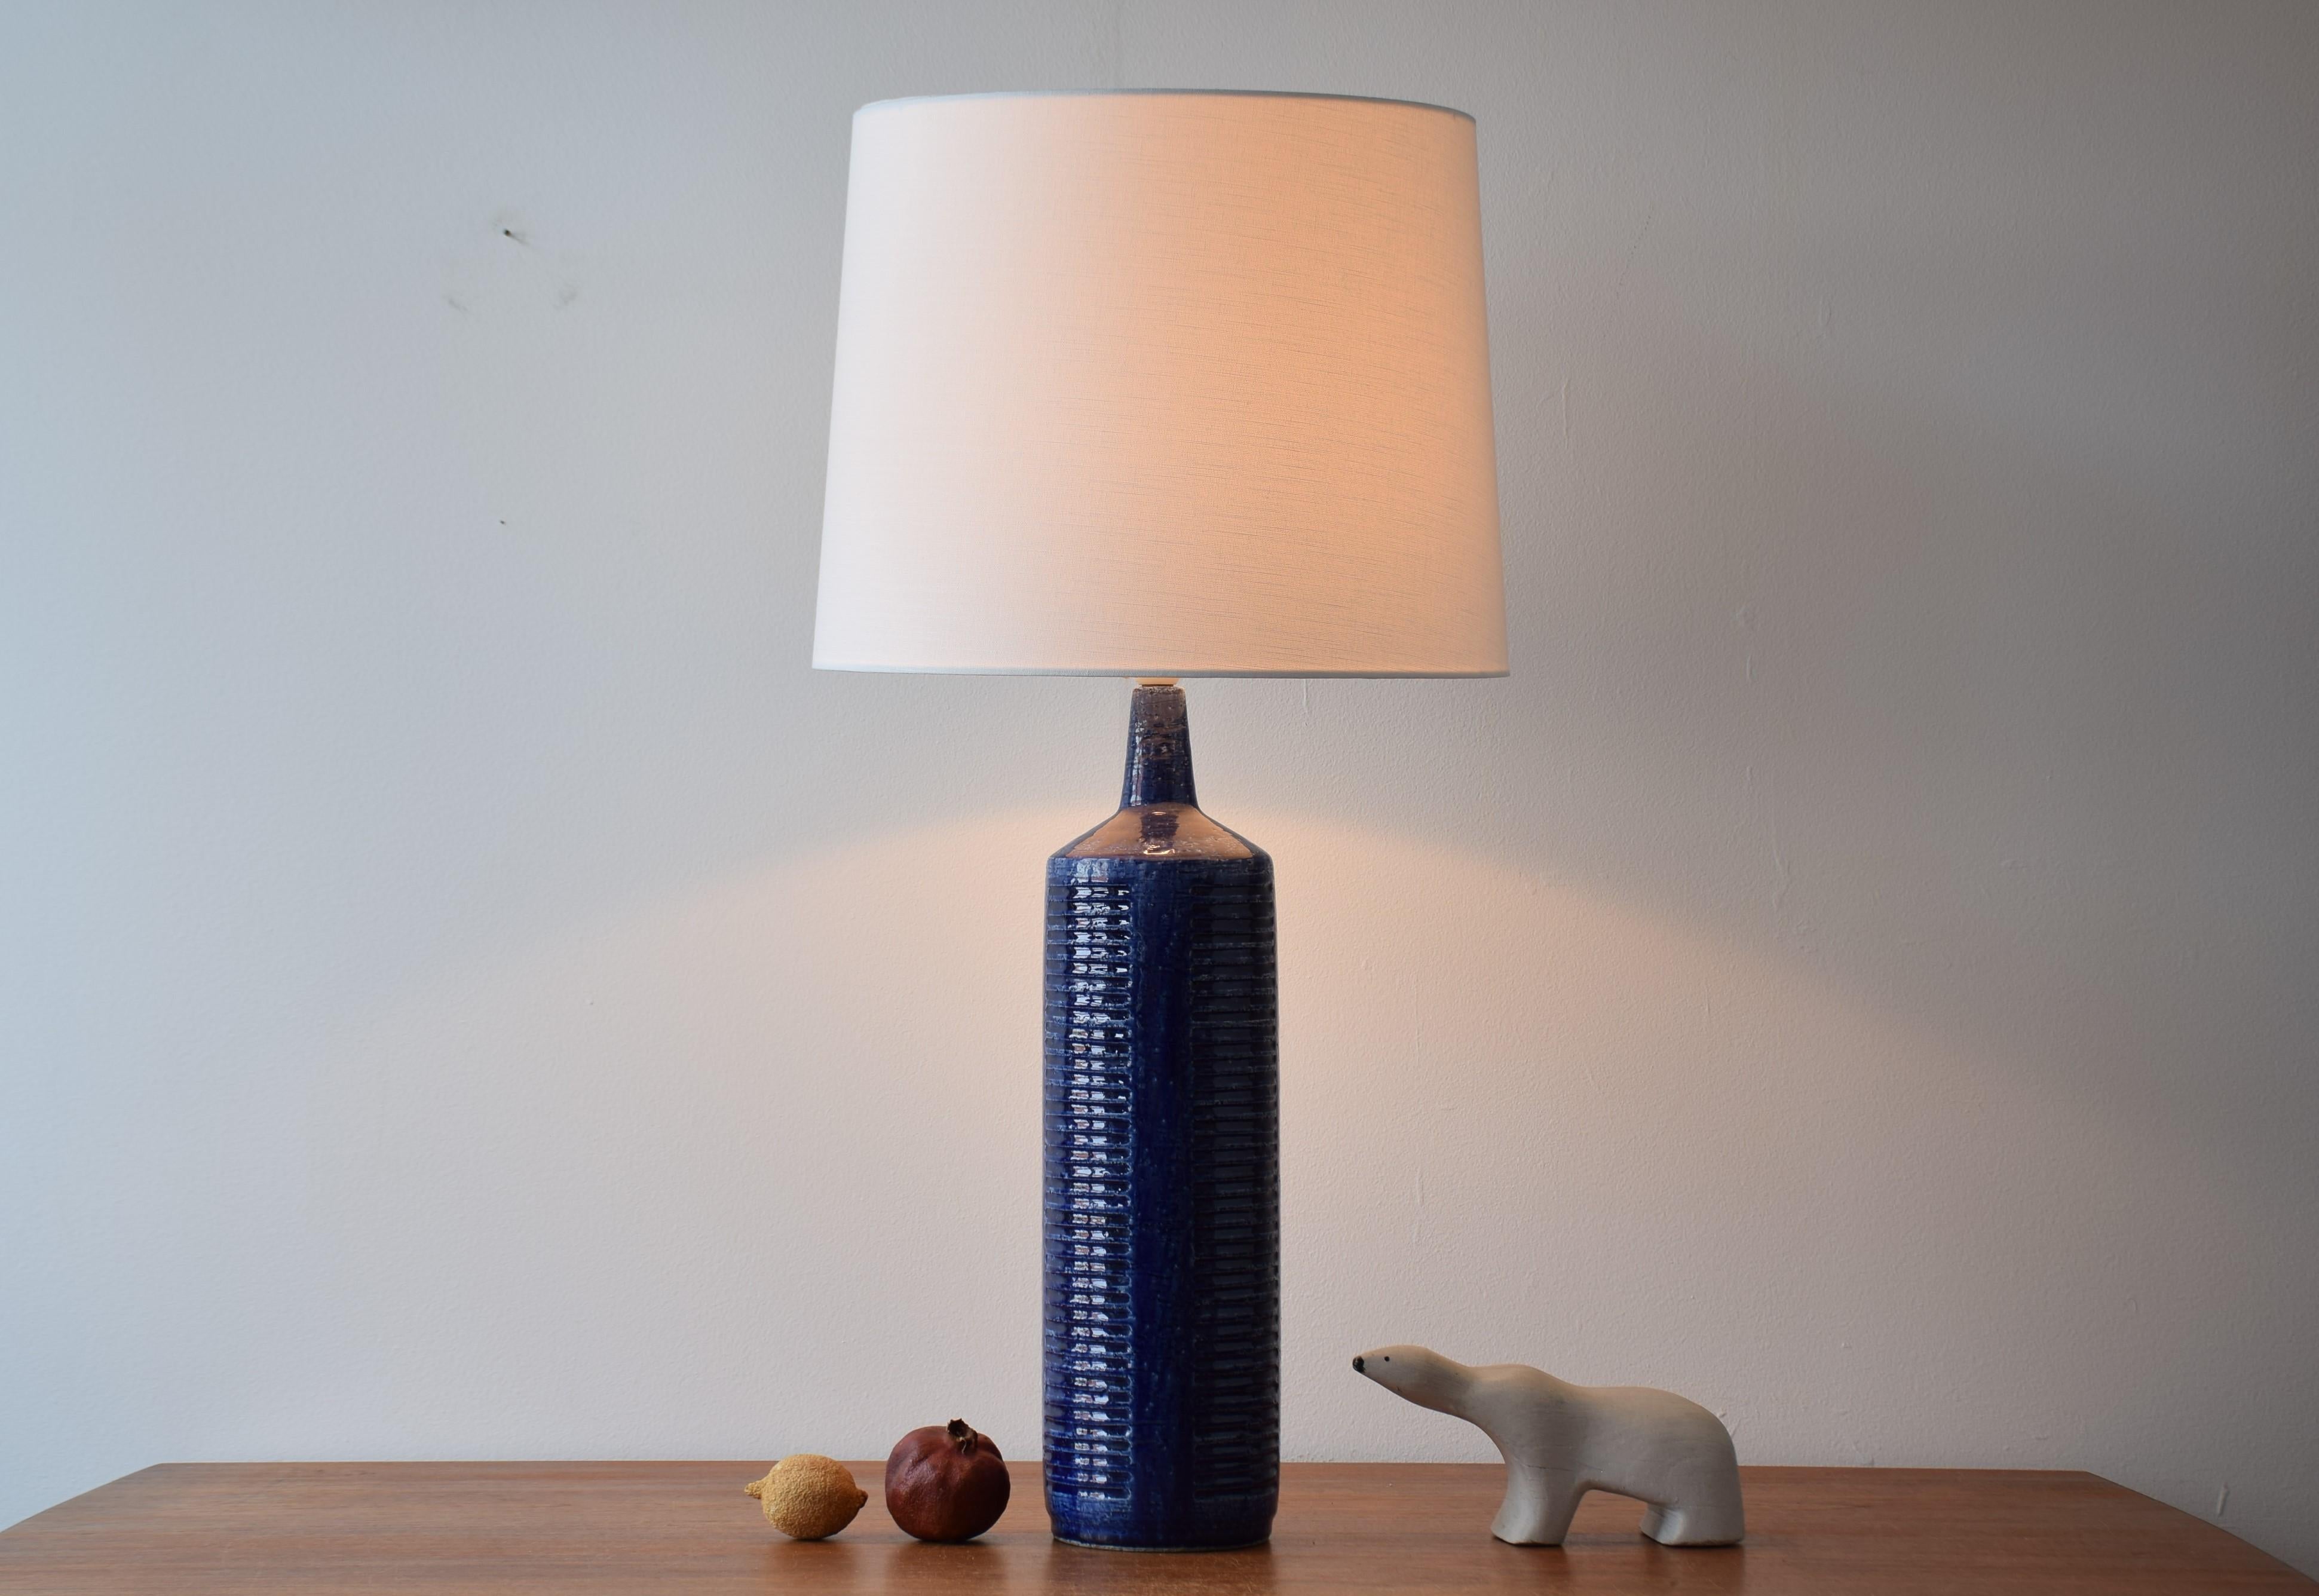 Very tall and rare vintage Palshus Denmark table lamp including new quality lampshade!

The lamp was designed by Per Linnemann-Schmidt and manufactured circa 1960s. The glaze is cobalt blue with speckles and the lamp is made with chamotte clay